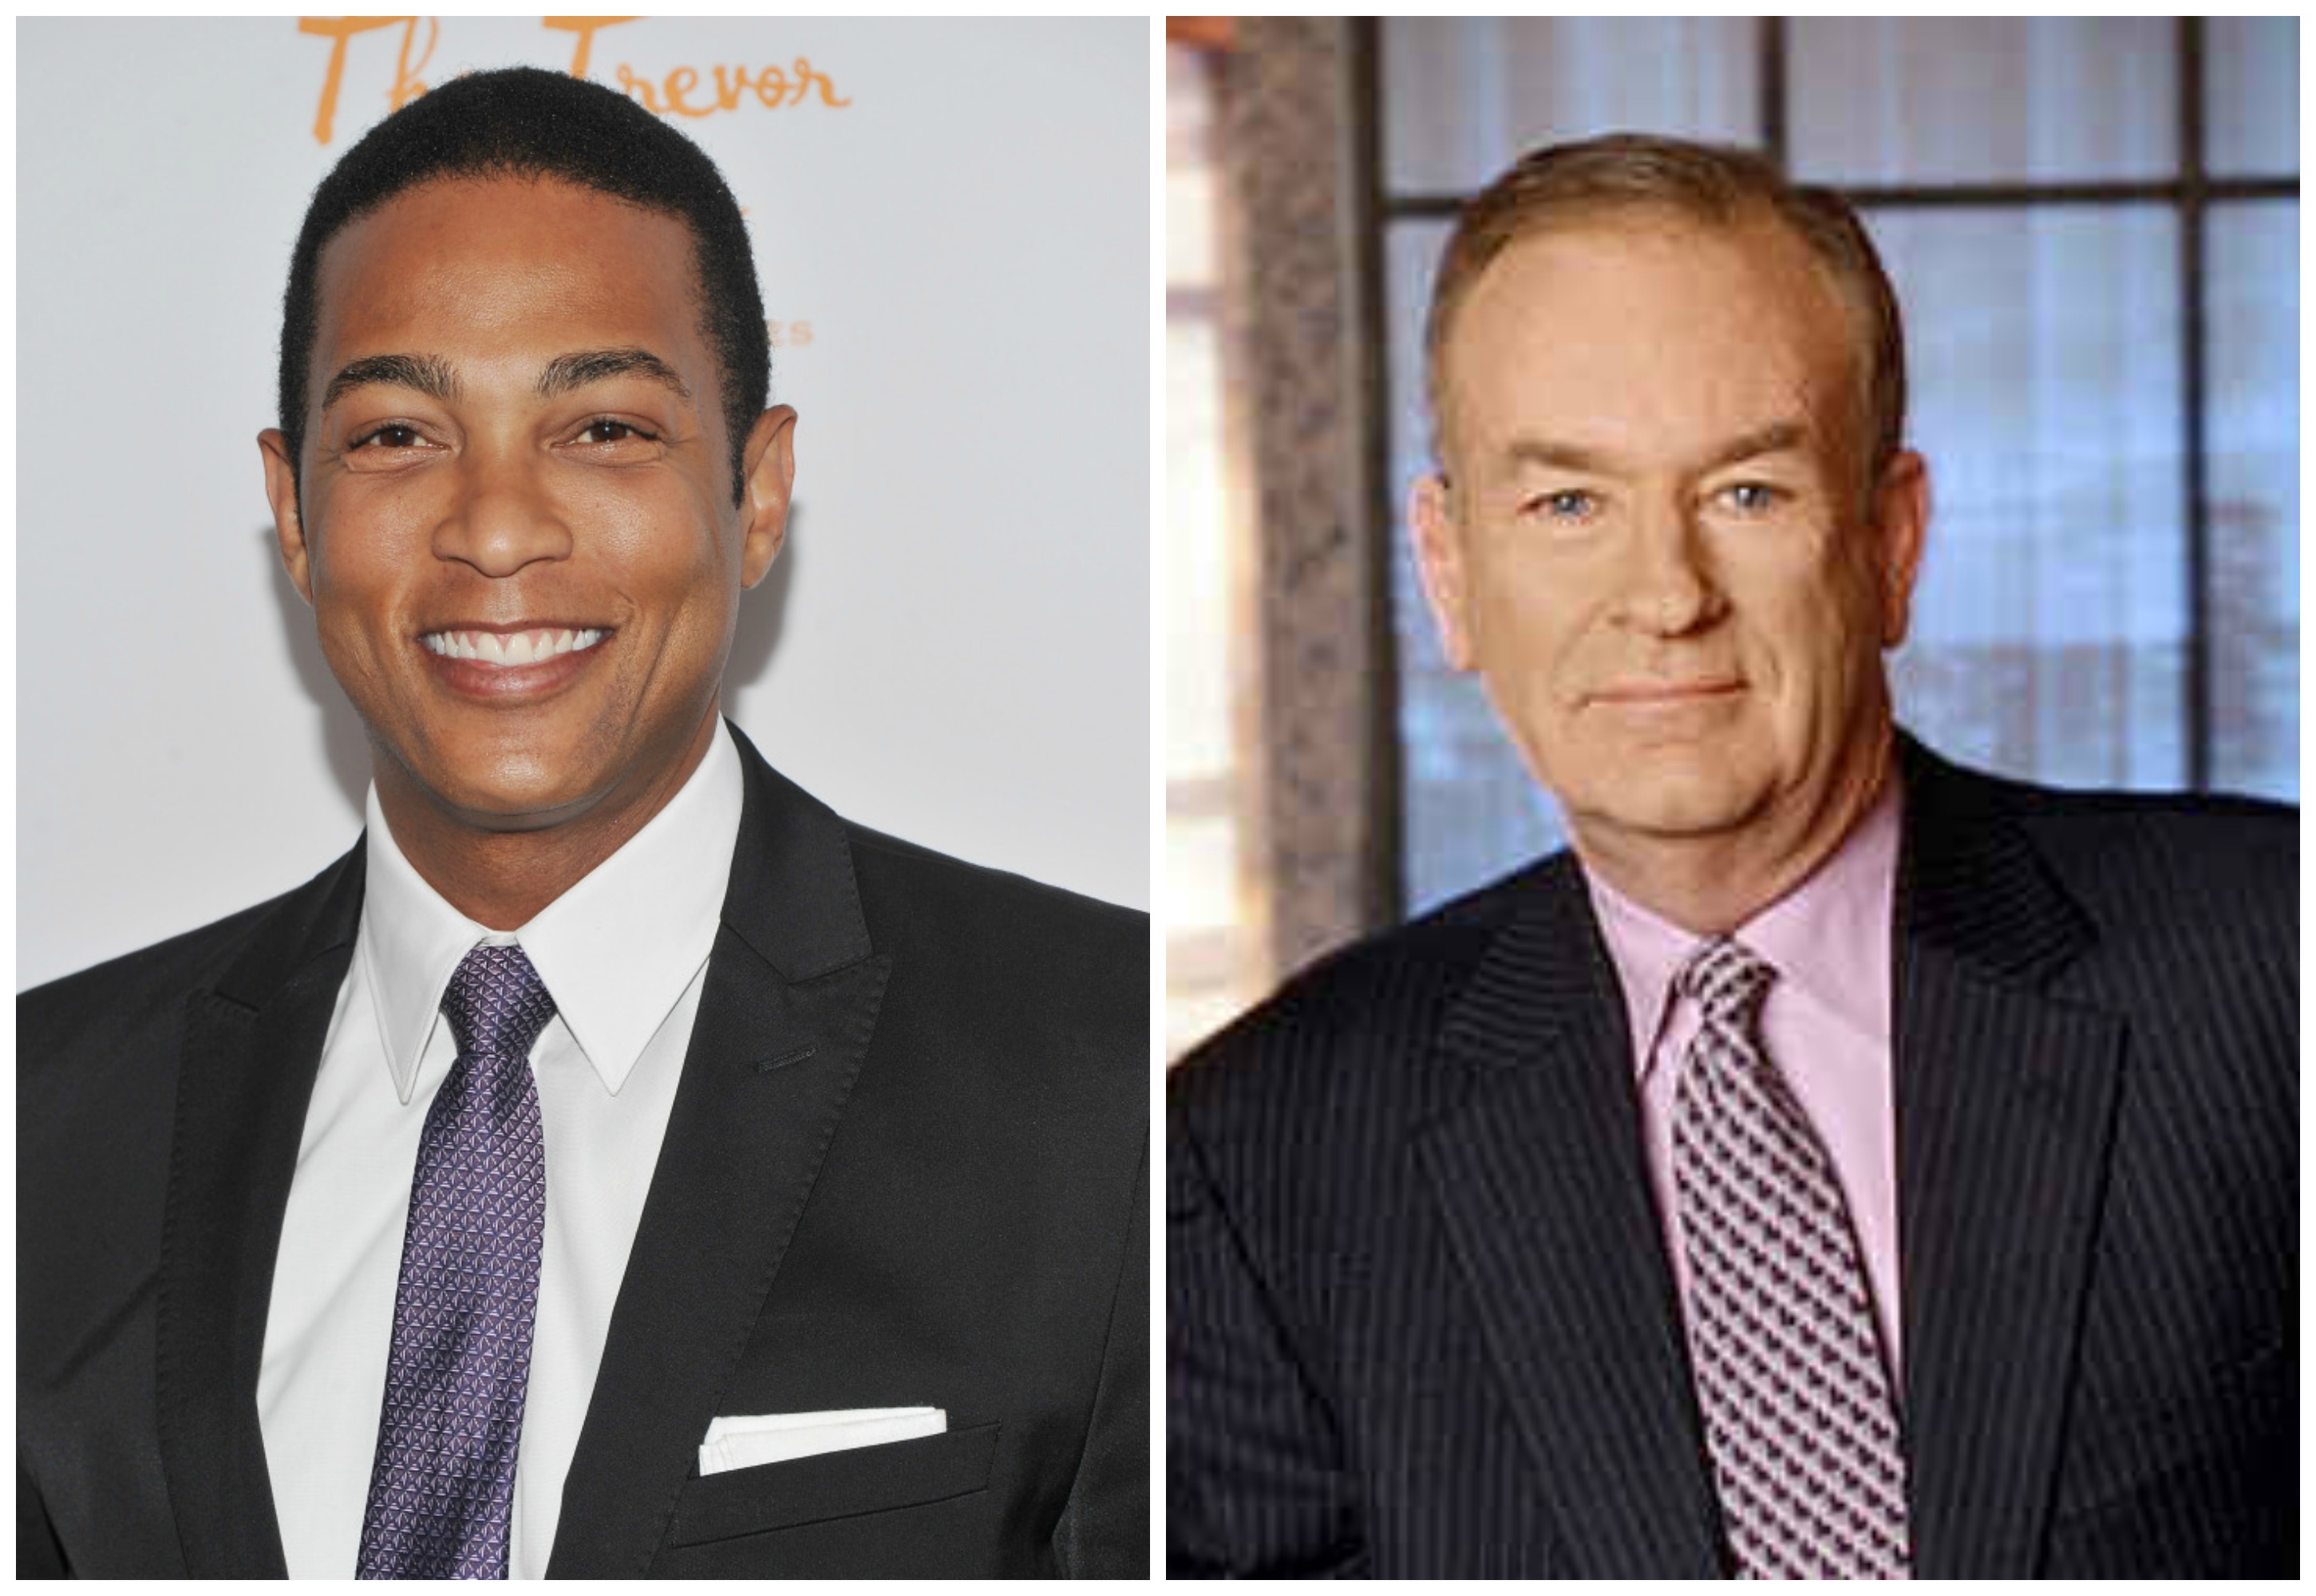 Don Lemon, Bill O’Reilly & the Politics of Deflection and Distortion